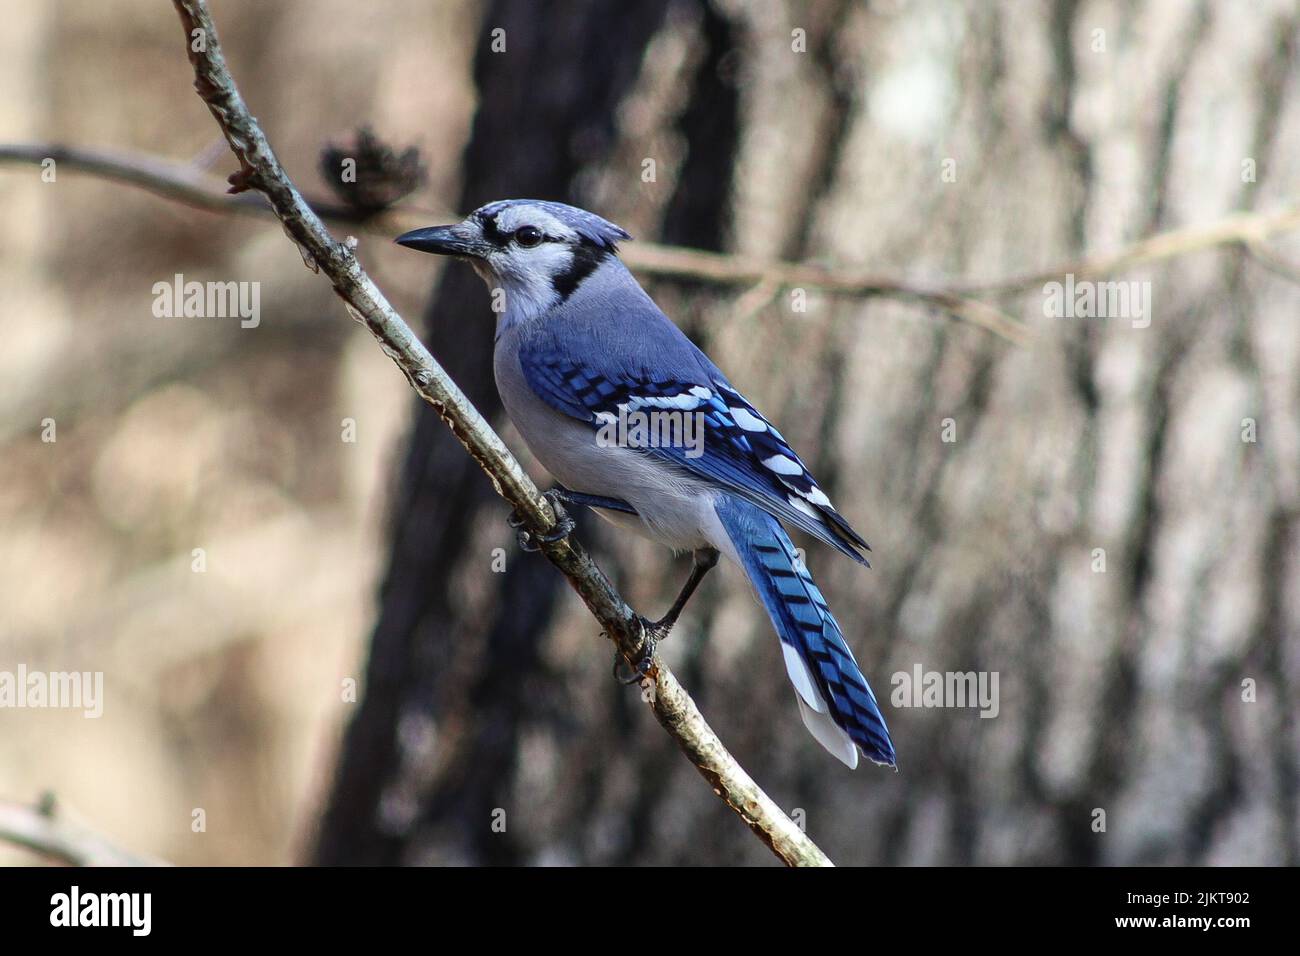 A selective focus shot of a blue jay bird perching on twig Stock Photo